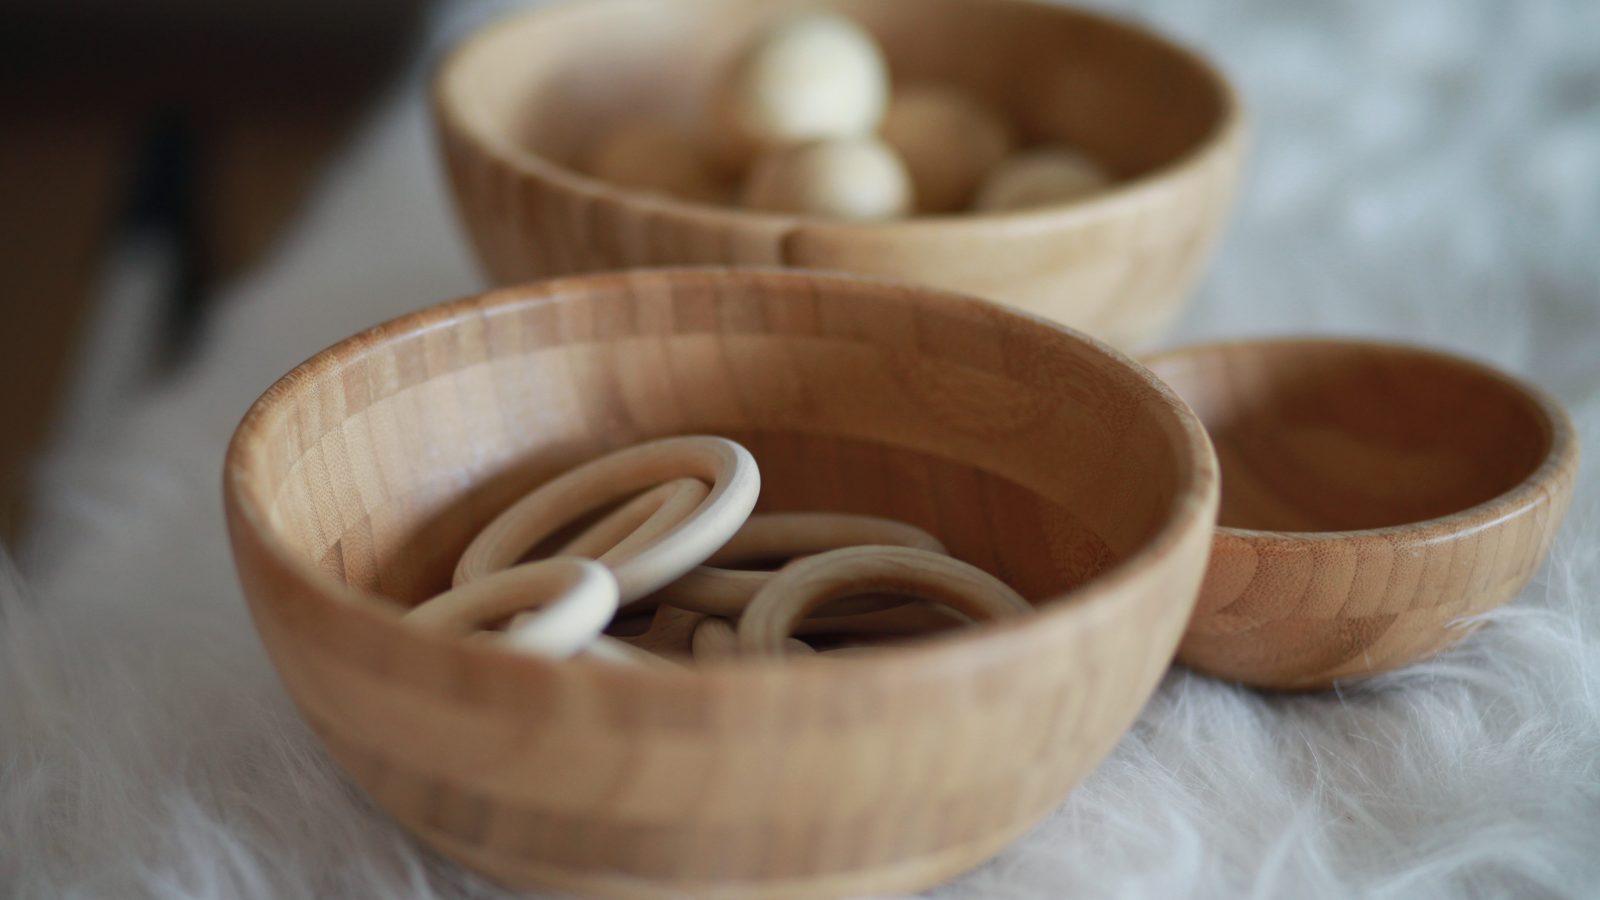 Bowl with wooden sensory materials for baby classroom